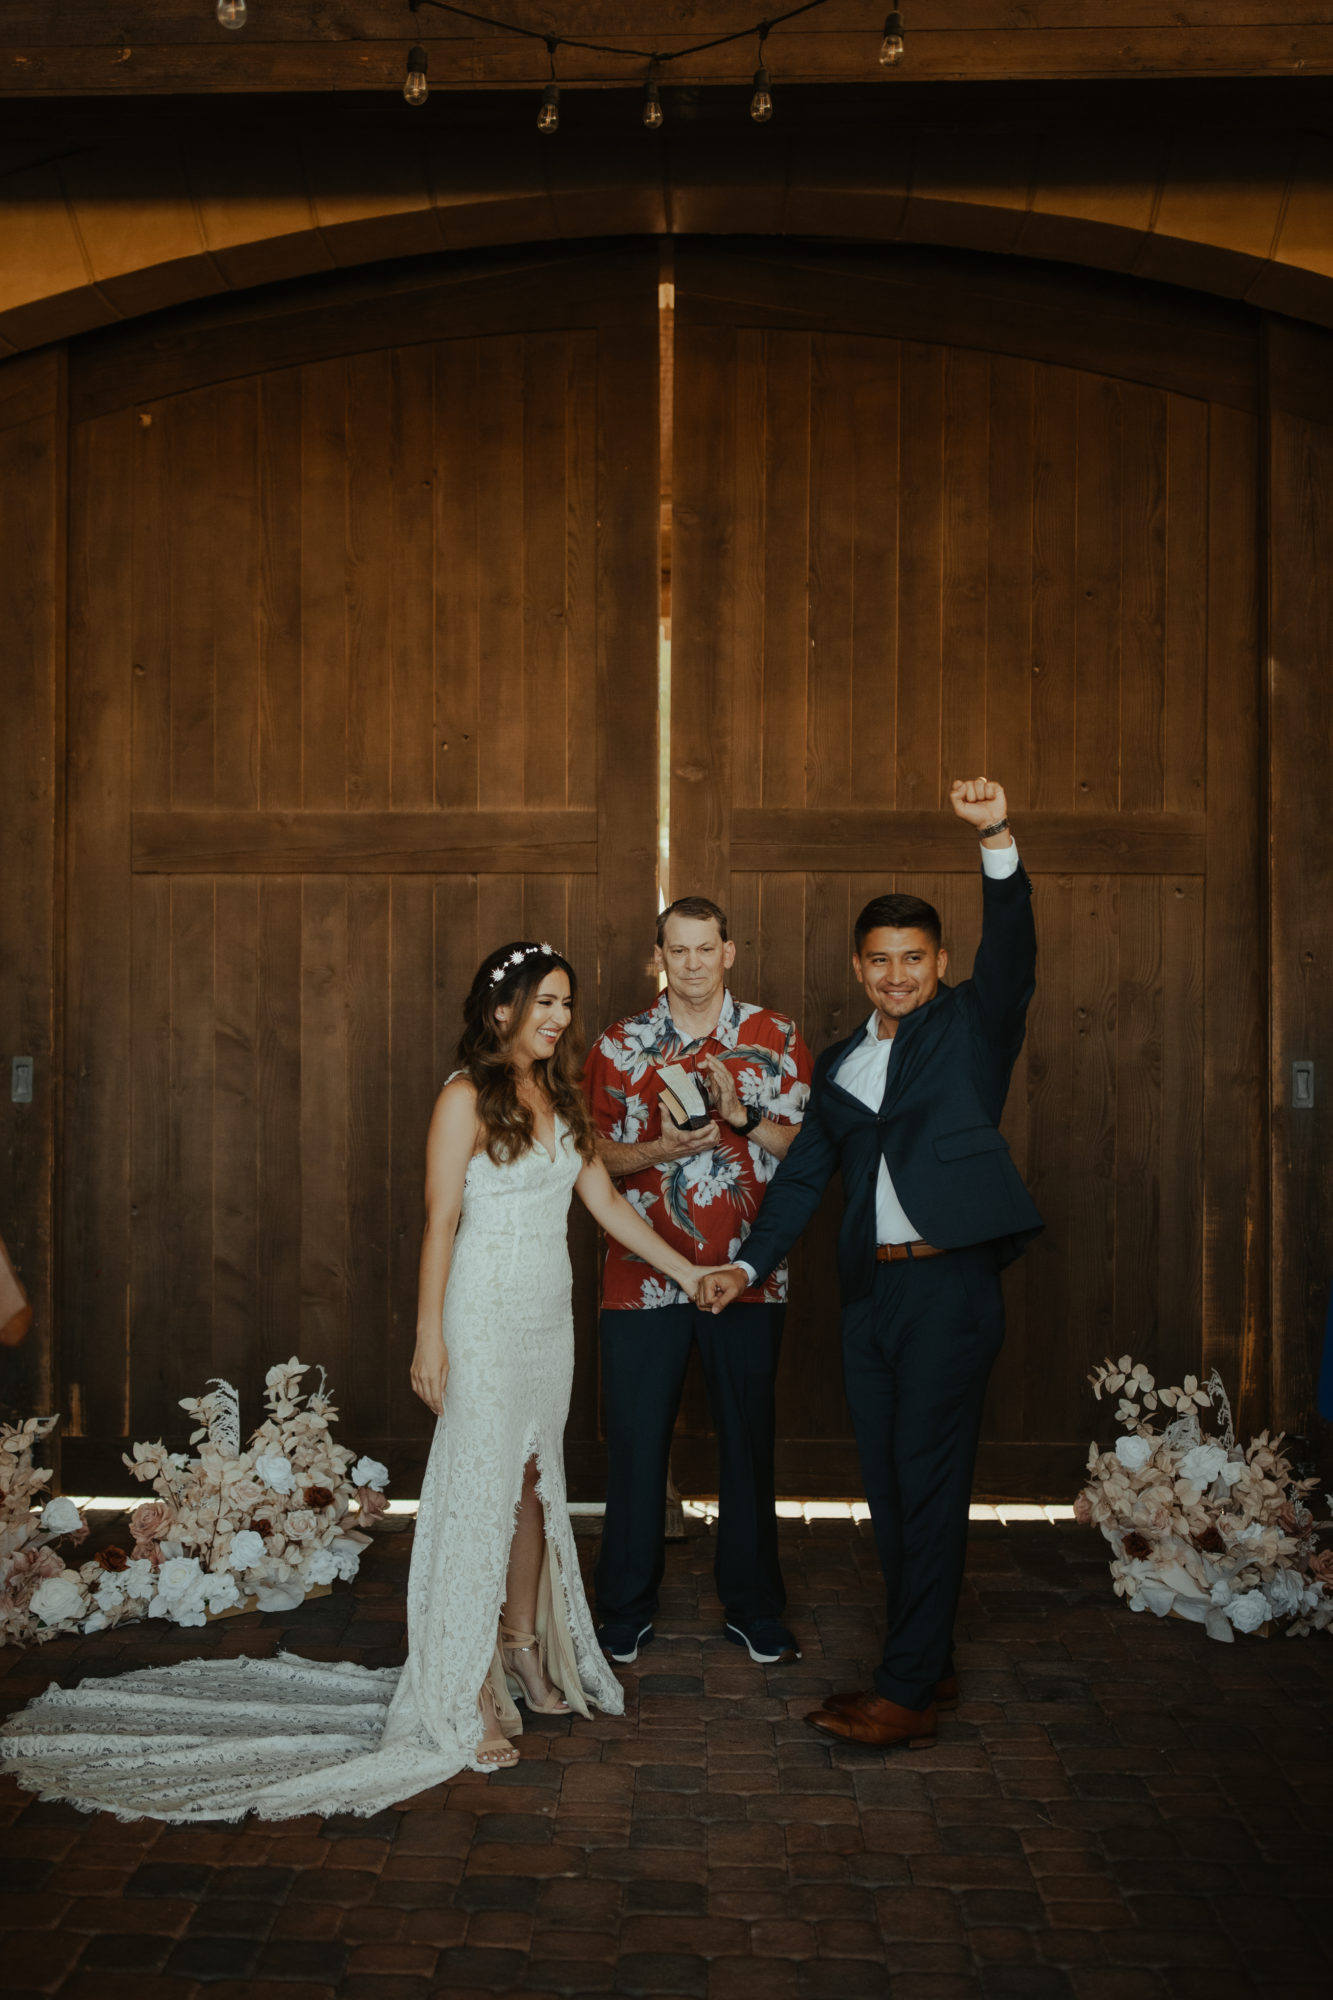 groom fist pumping in celebration after being pronounced husband and wife by the officiant during their wedding ceremony